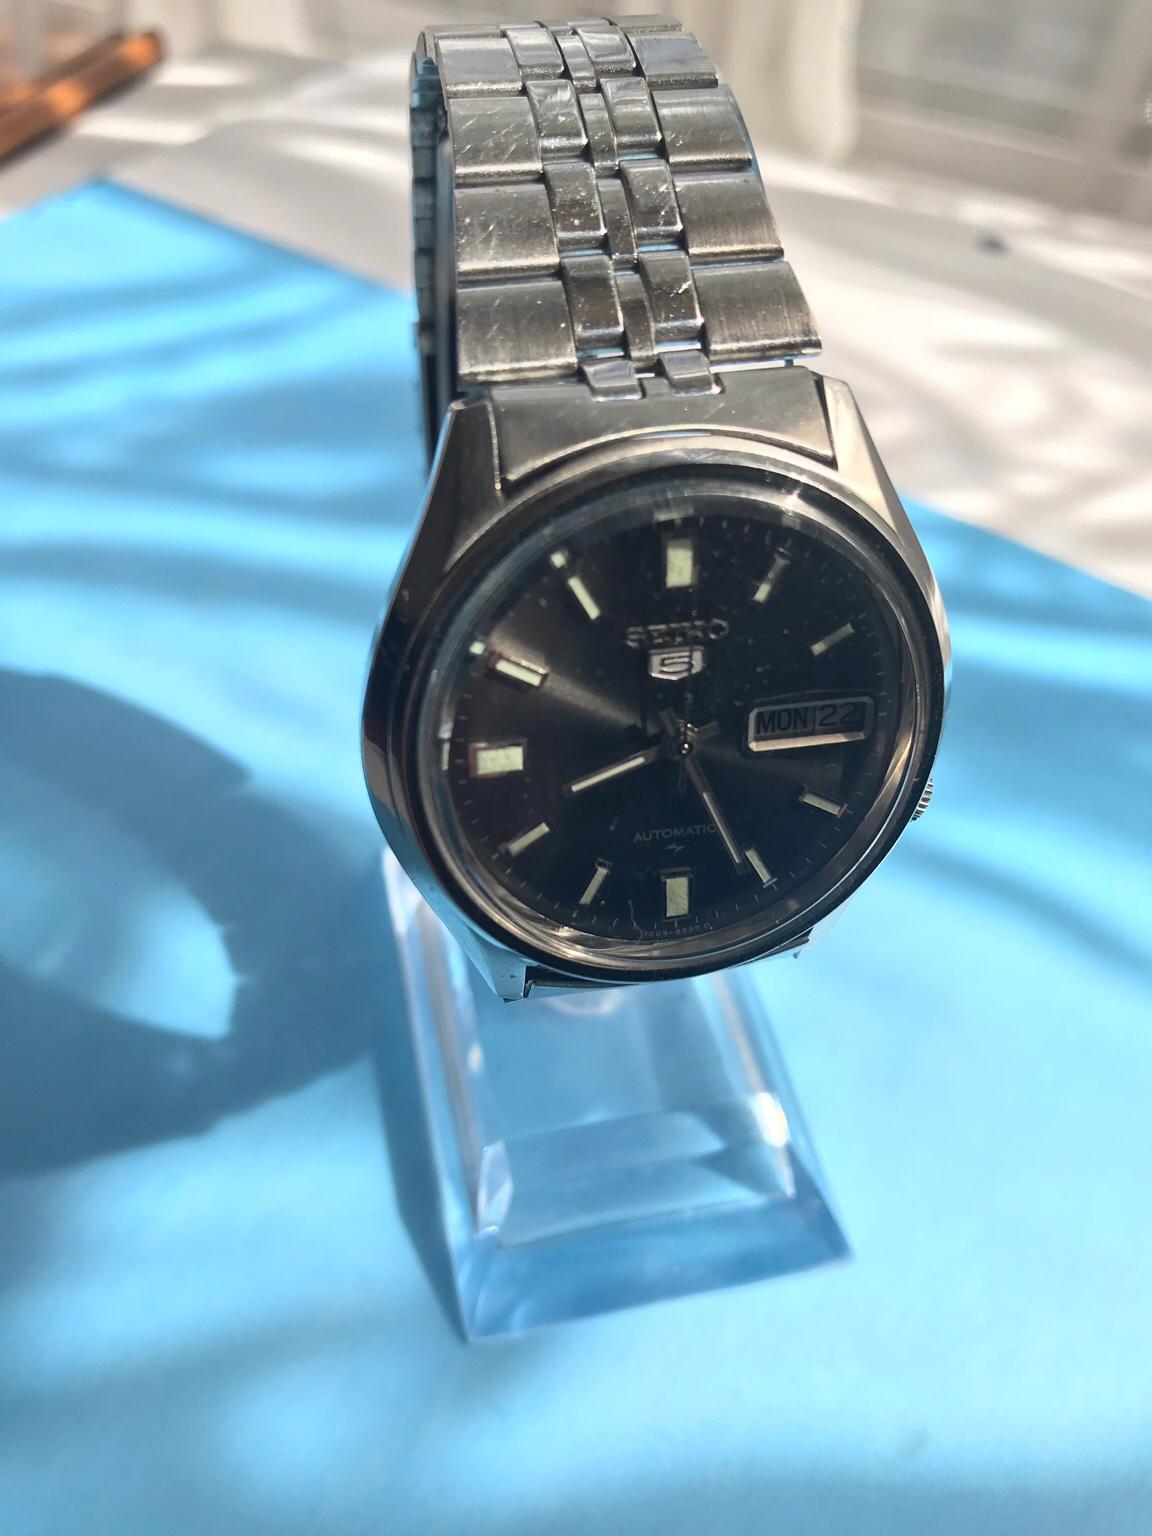 Seiko 5 Automatic Watch 7009-4040 in N14 Enfield for £ for sale |  Shpock